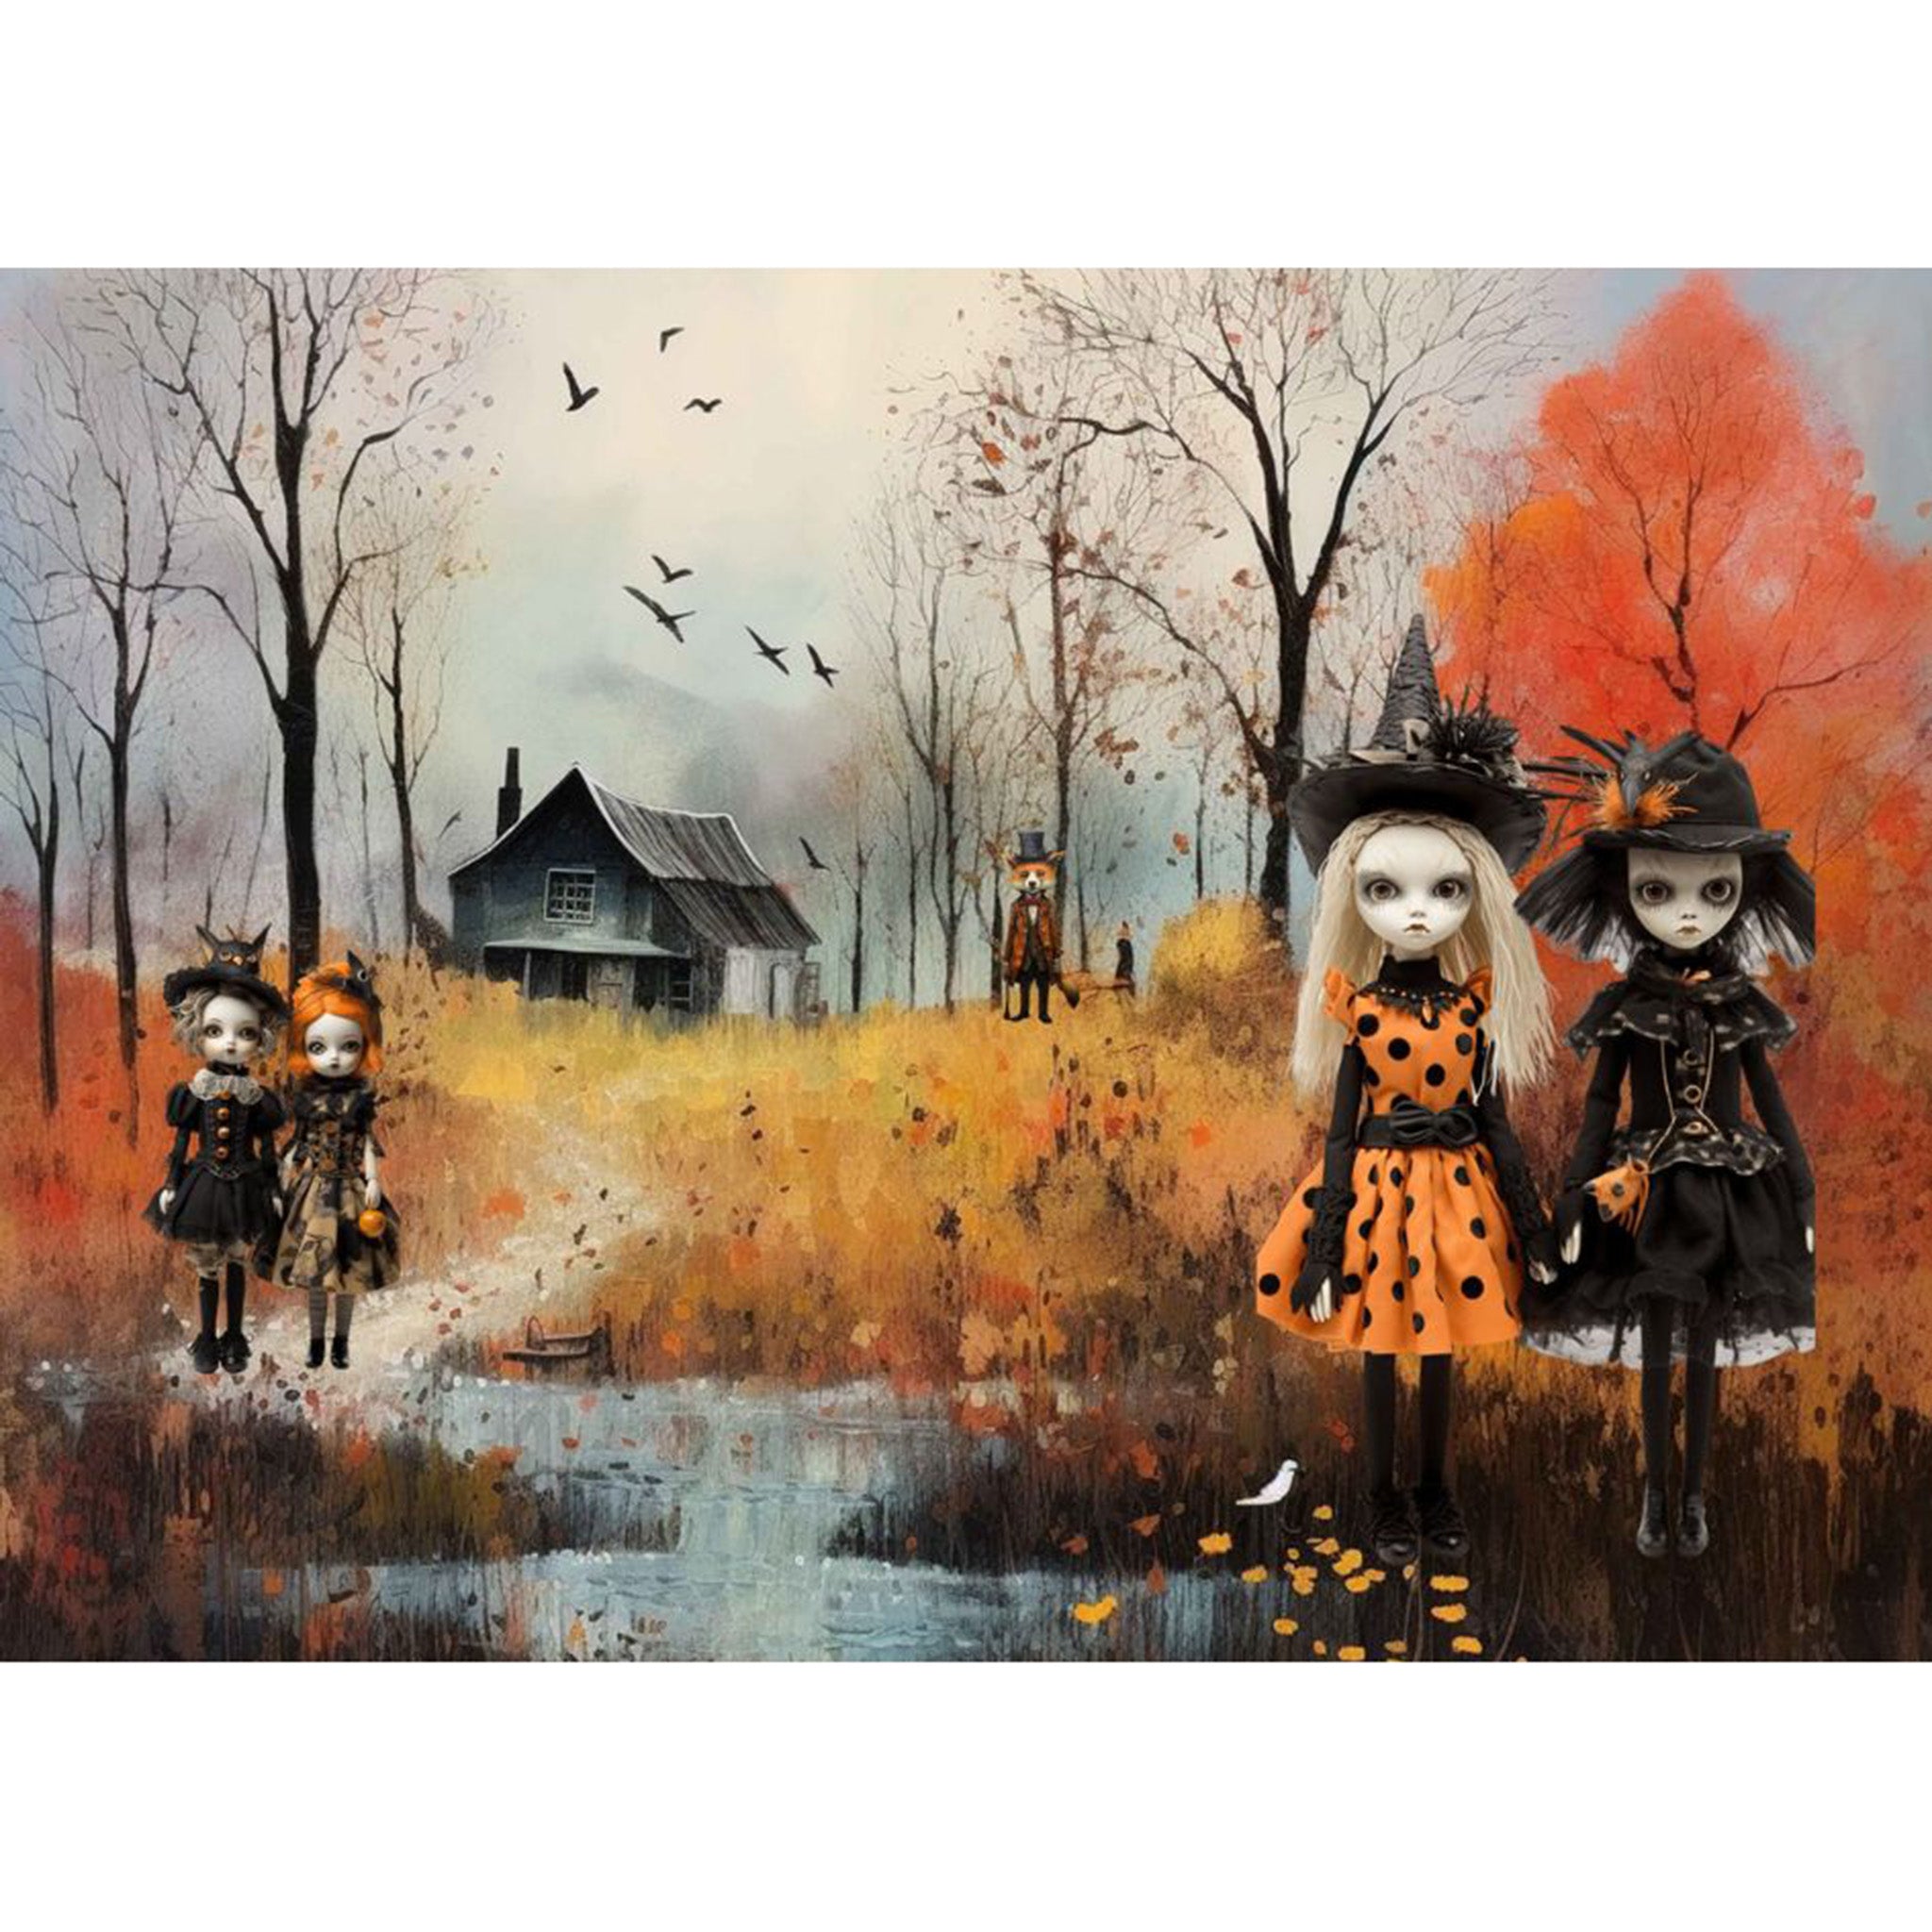 Tissue paper design that features 4 little witches by a creek, a haunted house, and a well-dressed fox.  White borders are on the top and bottom.